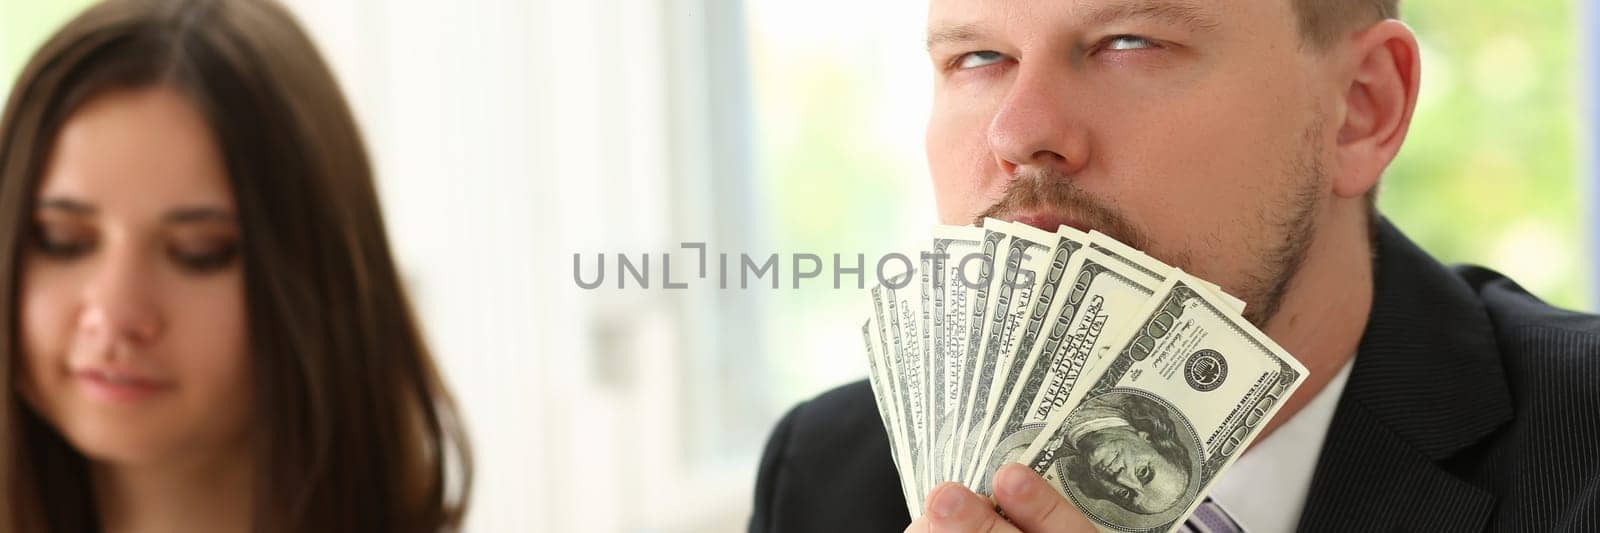 Man holds up dollars banknotes and enjoys success of financial income and growth. Emotion high from money concept